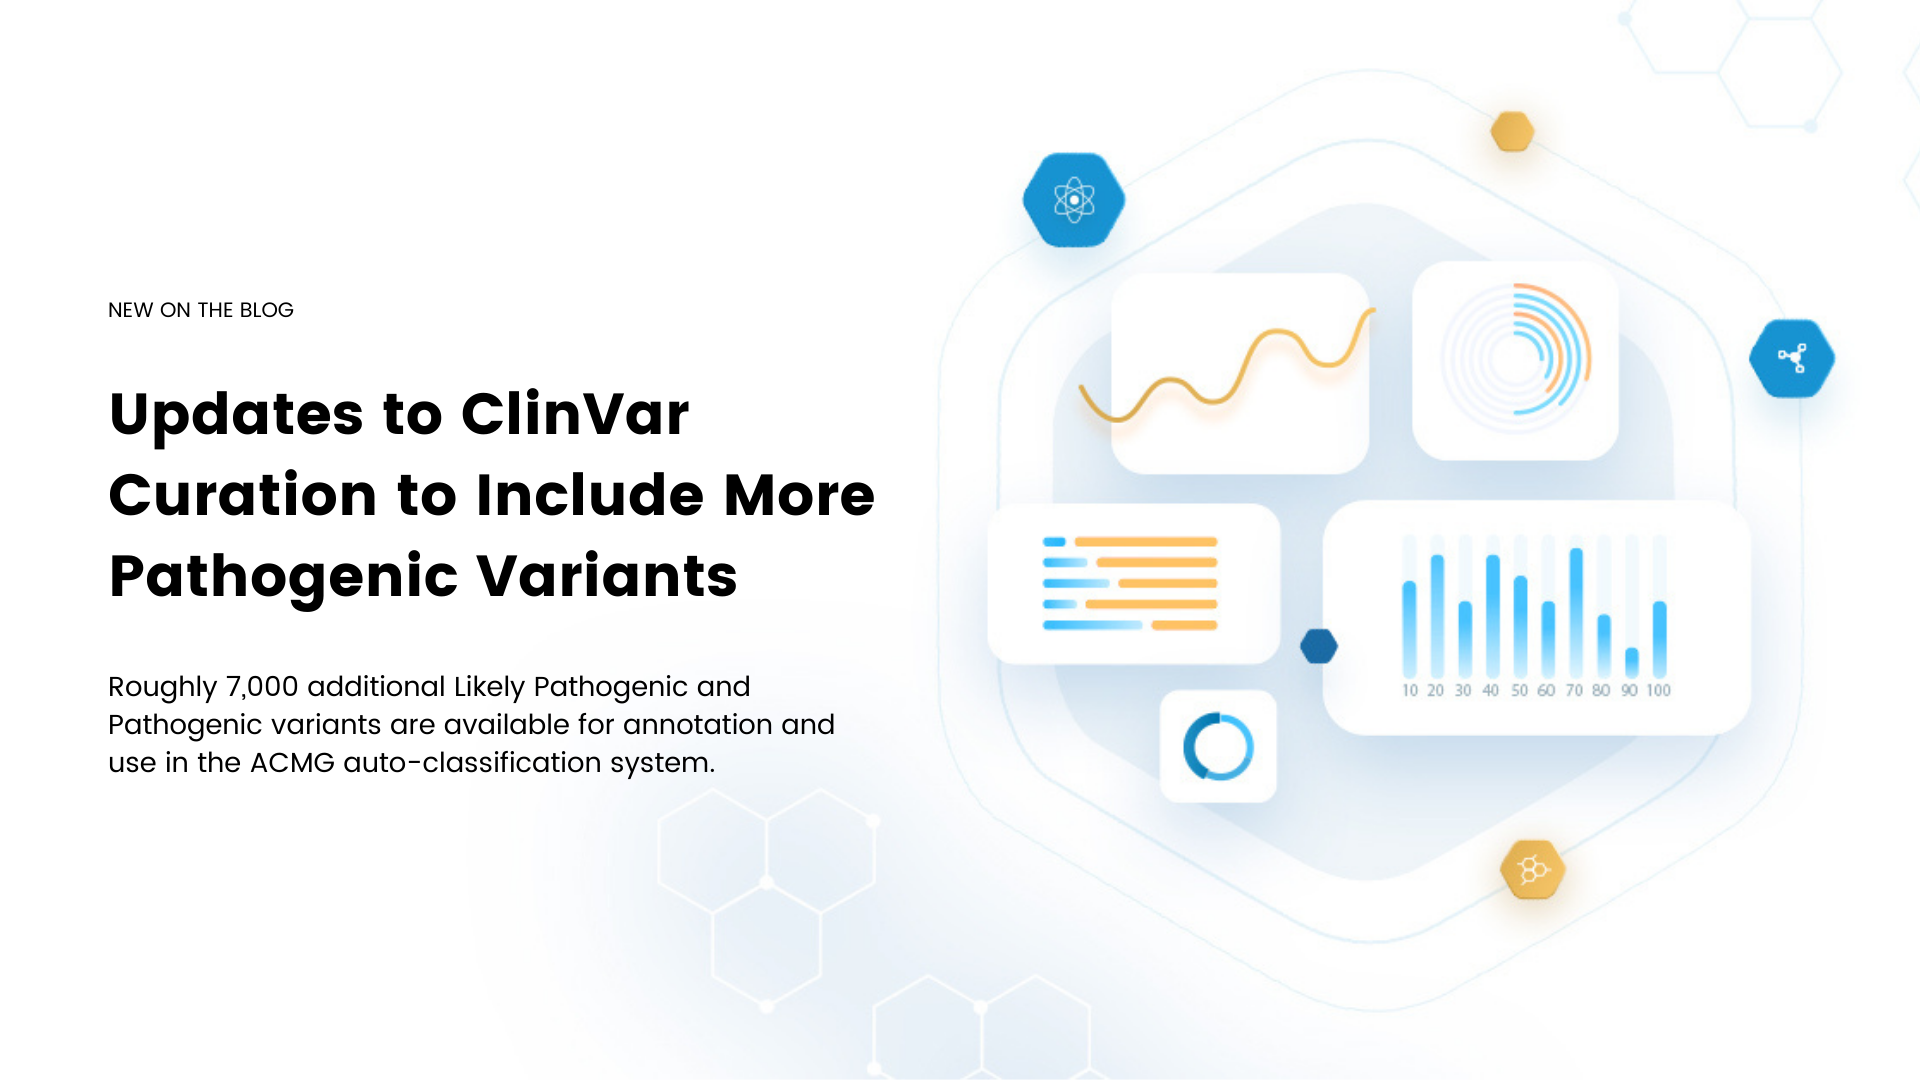 Updates to ClinVar Curation to Include More Pathogenic Variants